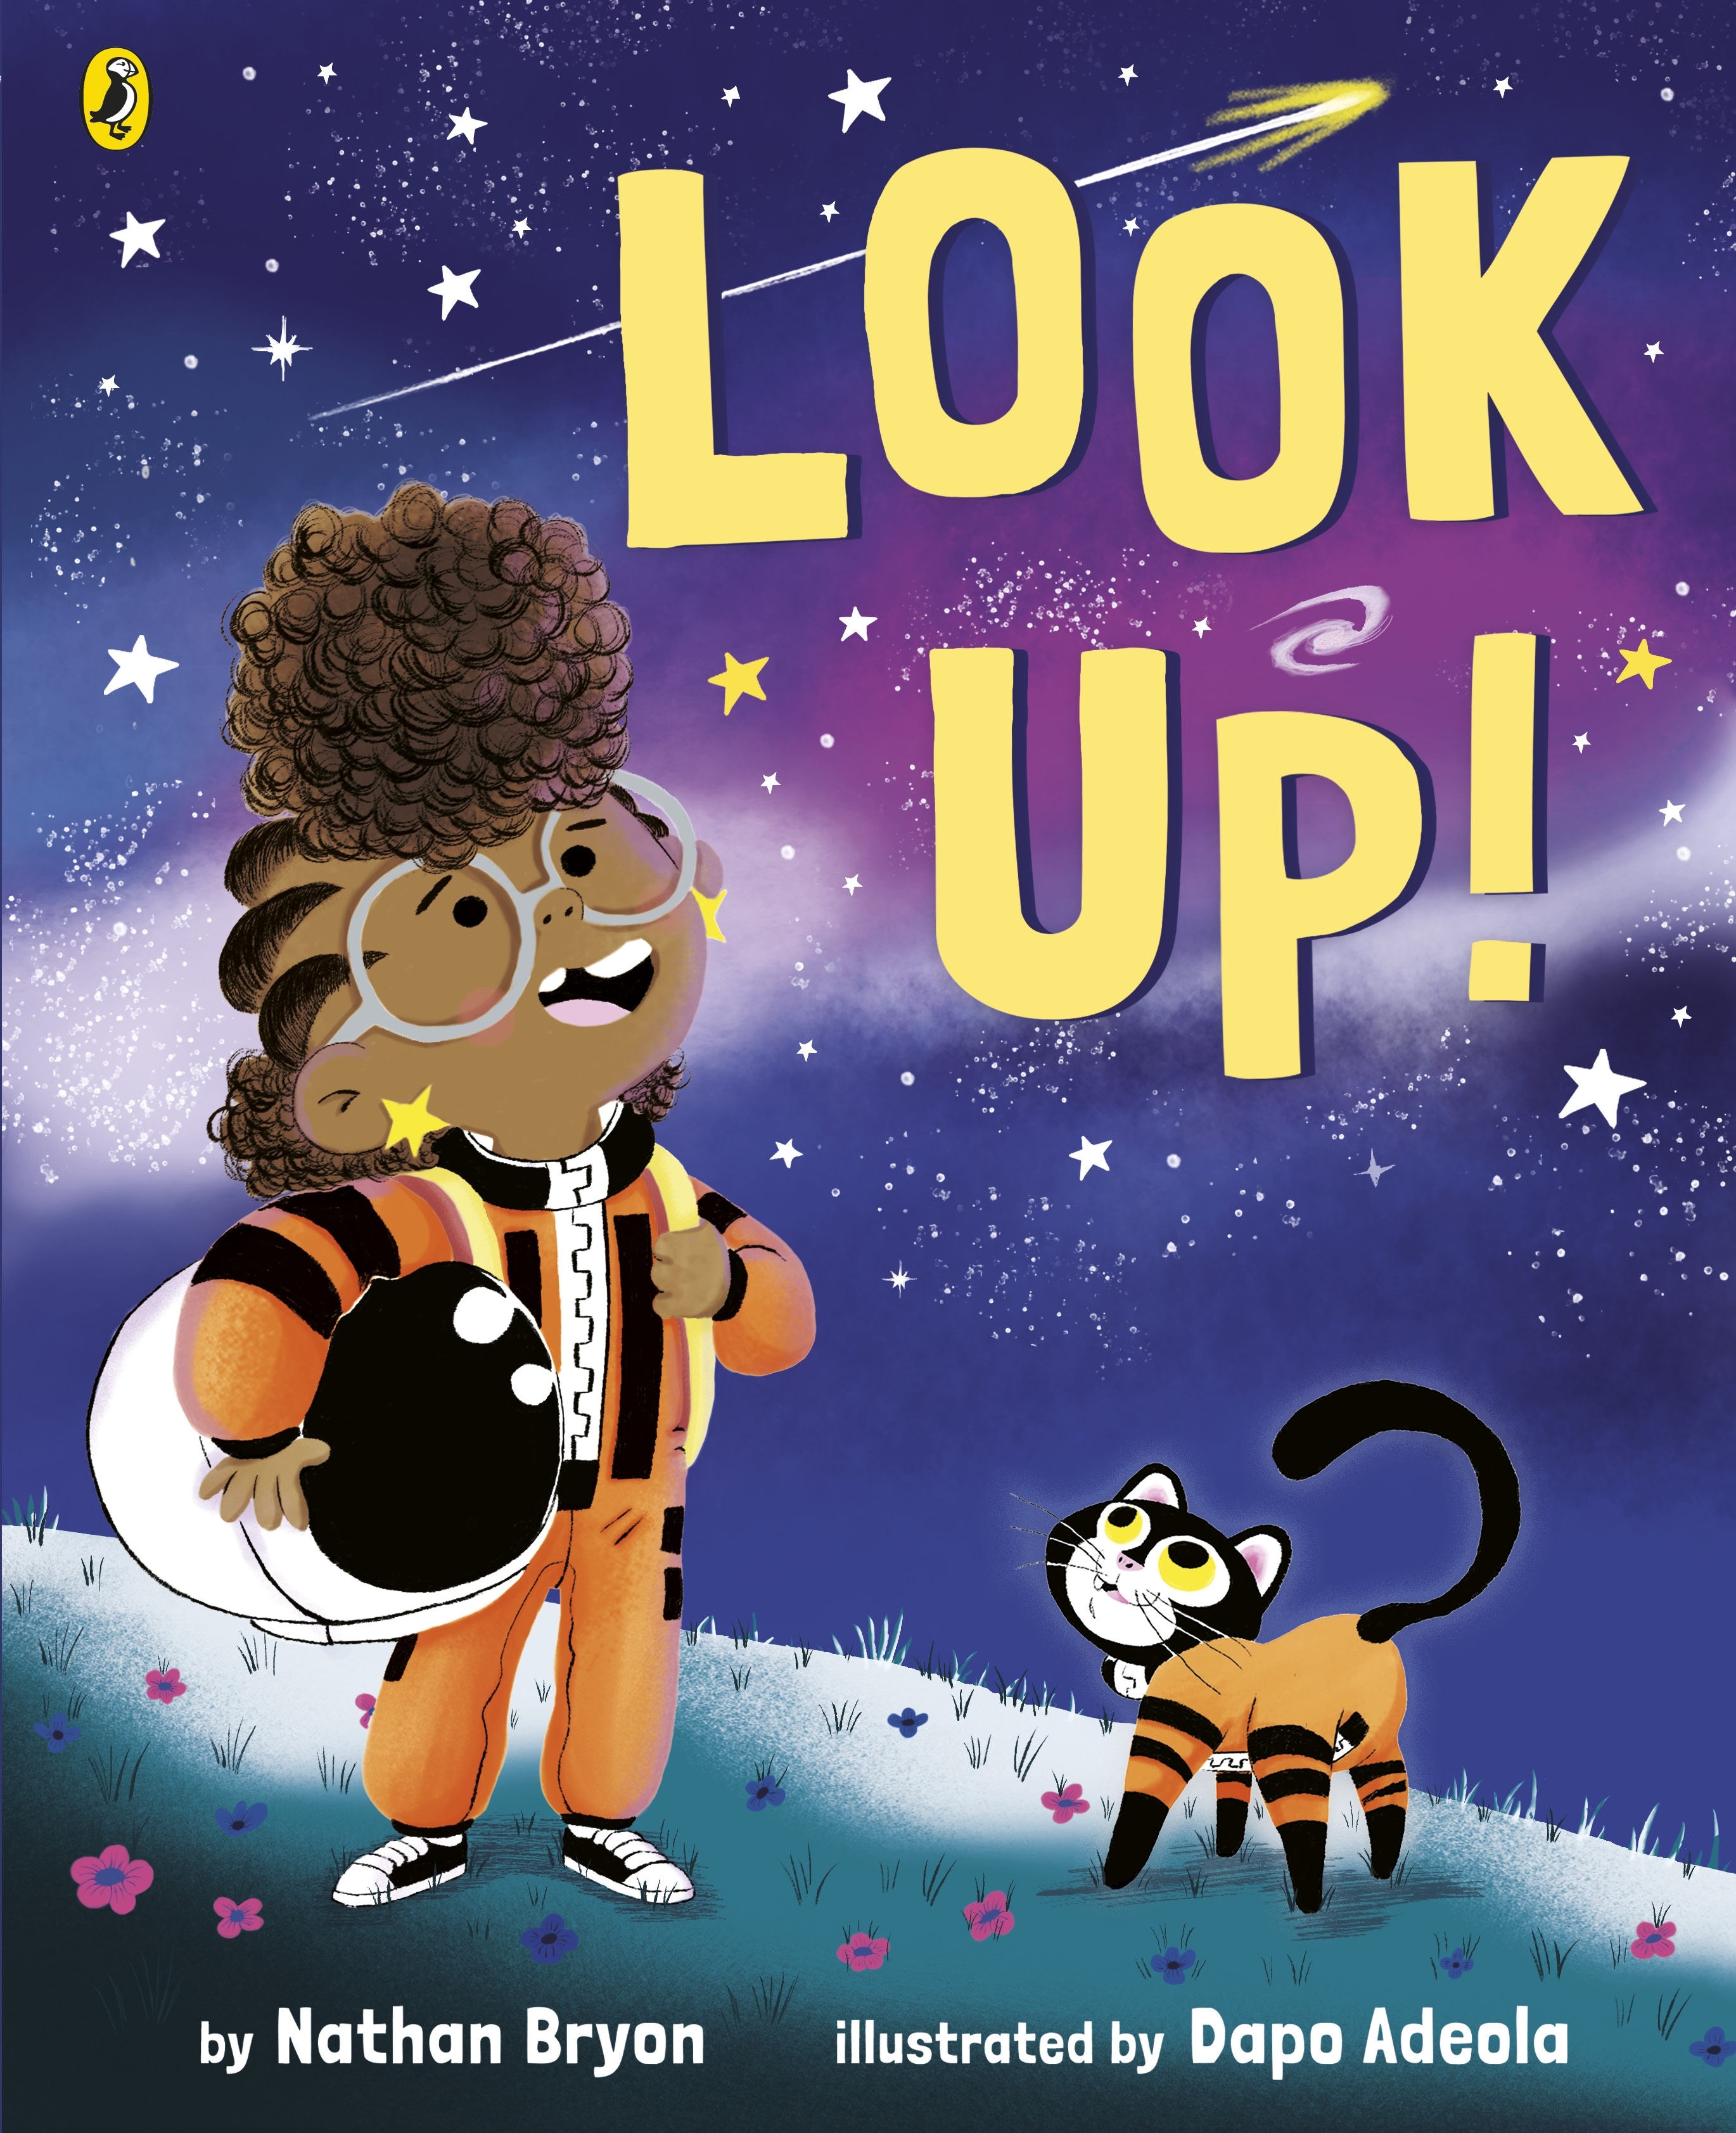 Book “Look Up!” by Nathan Bryon — June 13, 2019